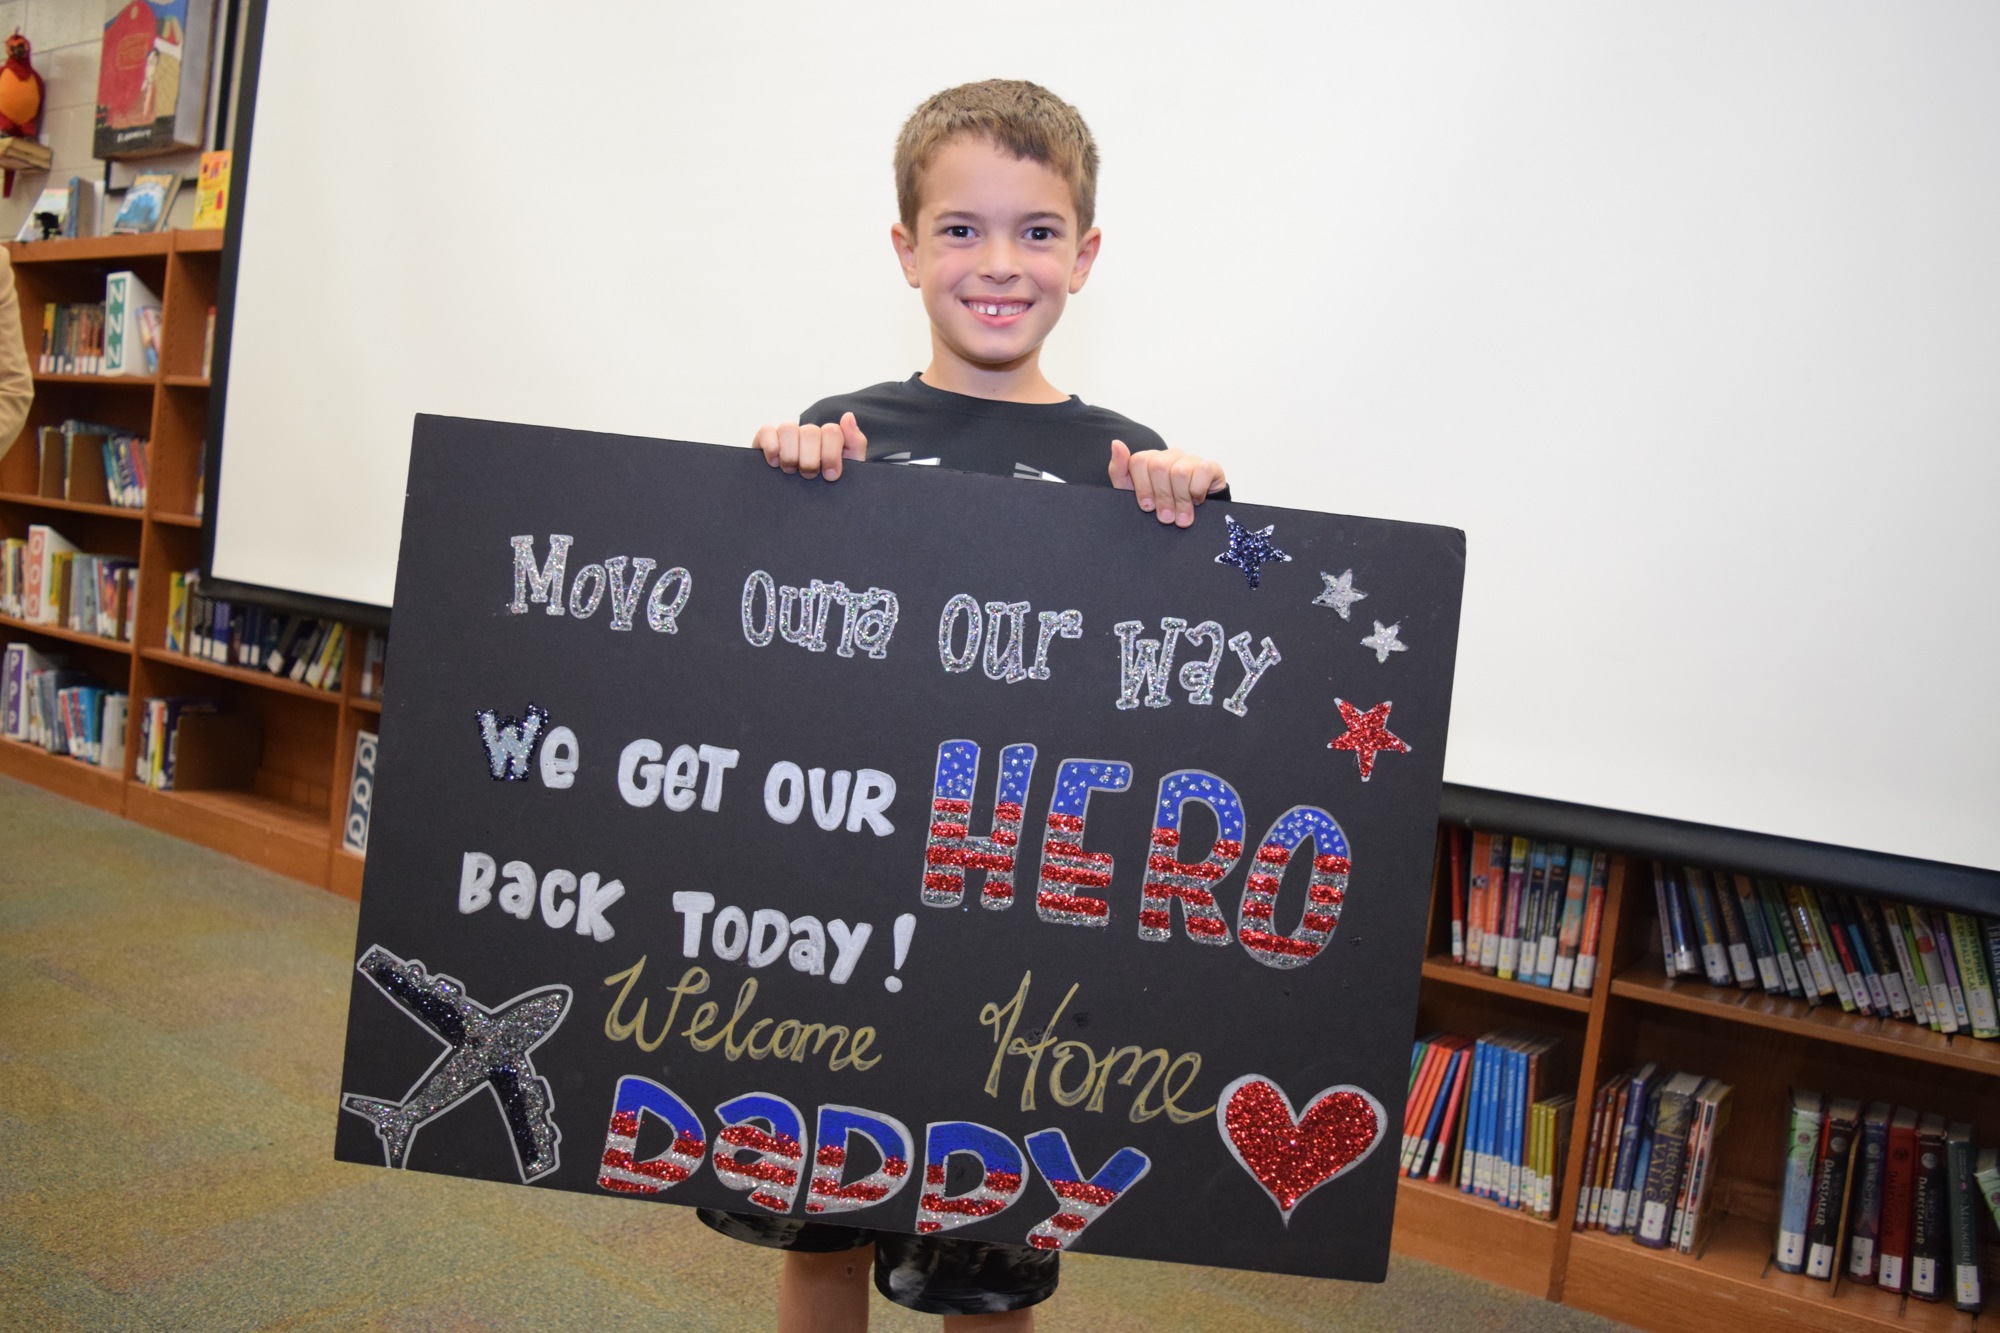 Chase Phillips, 7, proudly held up a sign welcoming his dad back home.